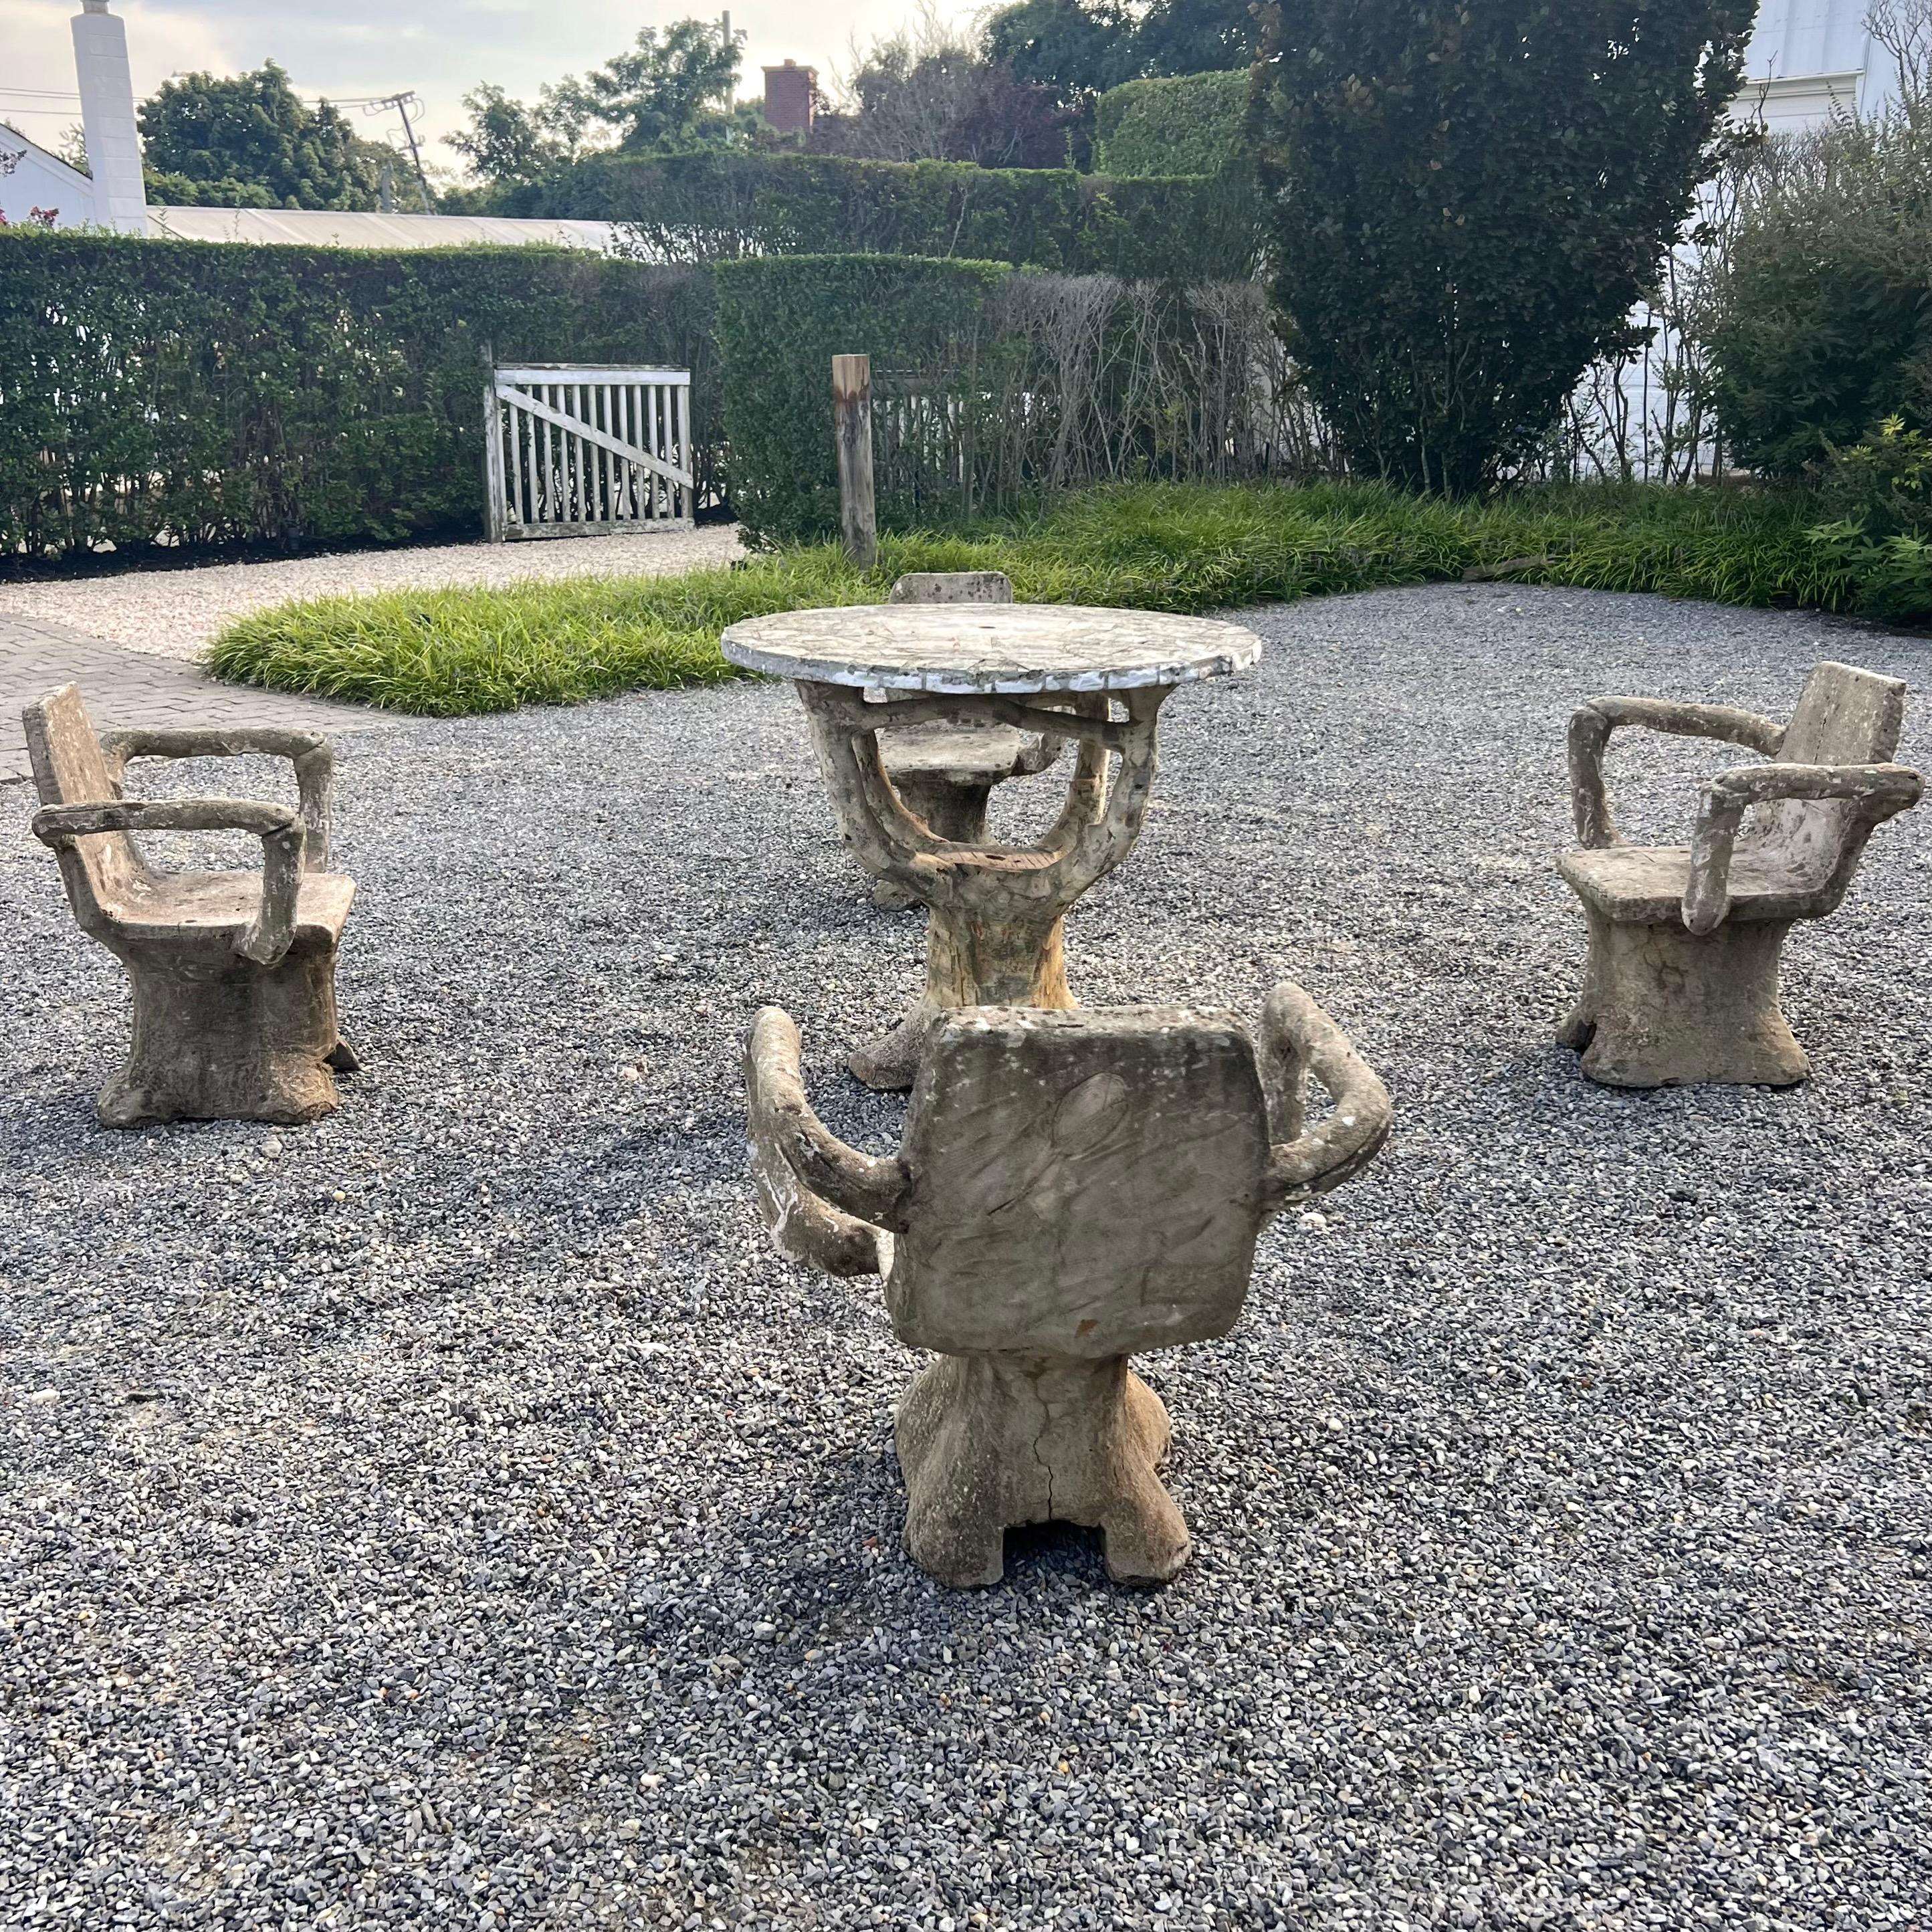 Anthropomorphic Faux Bois Concrete Table and 4 Chairs, 1950s France For Sale 3